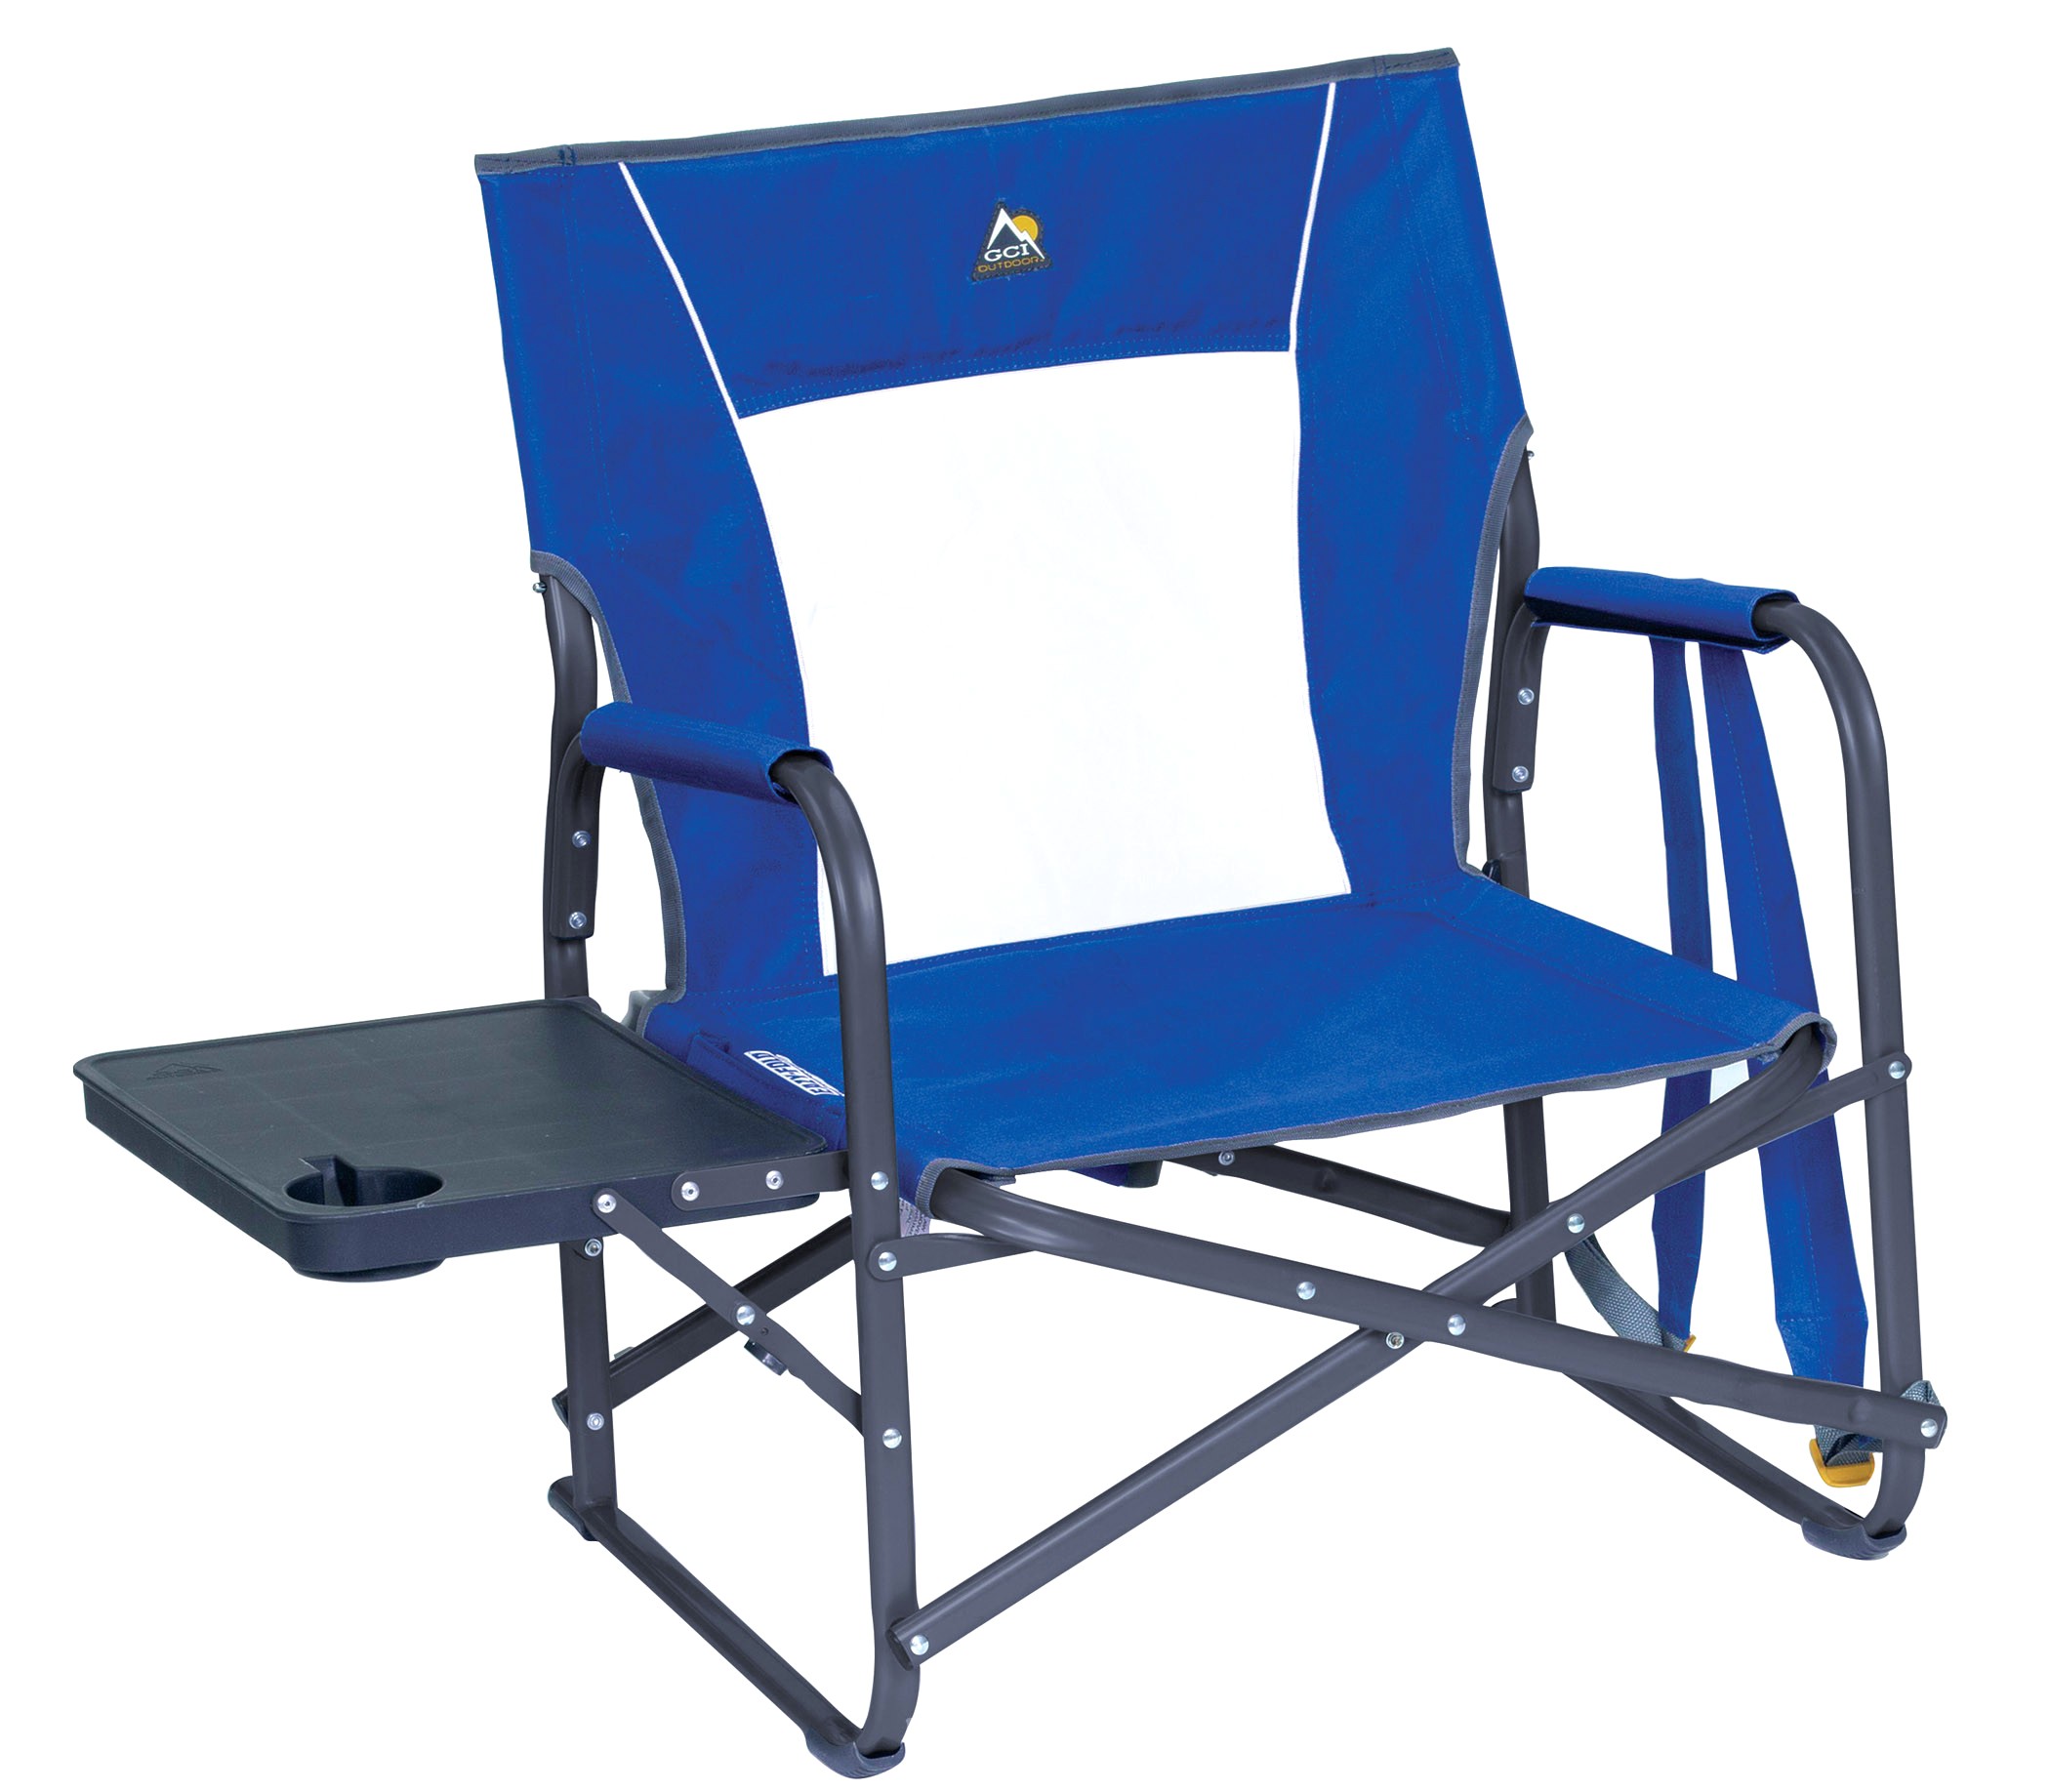 academy outdoor furniture beautiful furniture fabulous academy sports chairs new academy lawn chairs